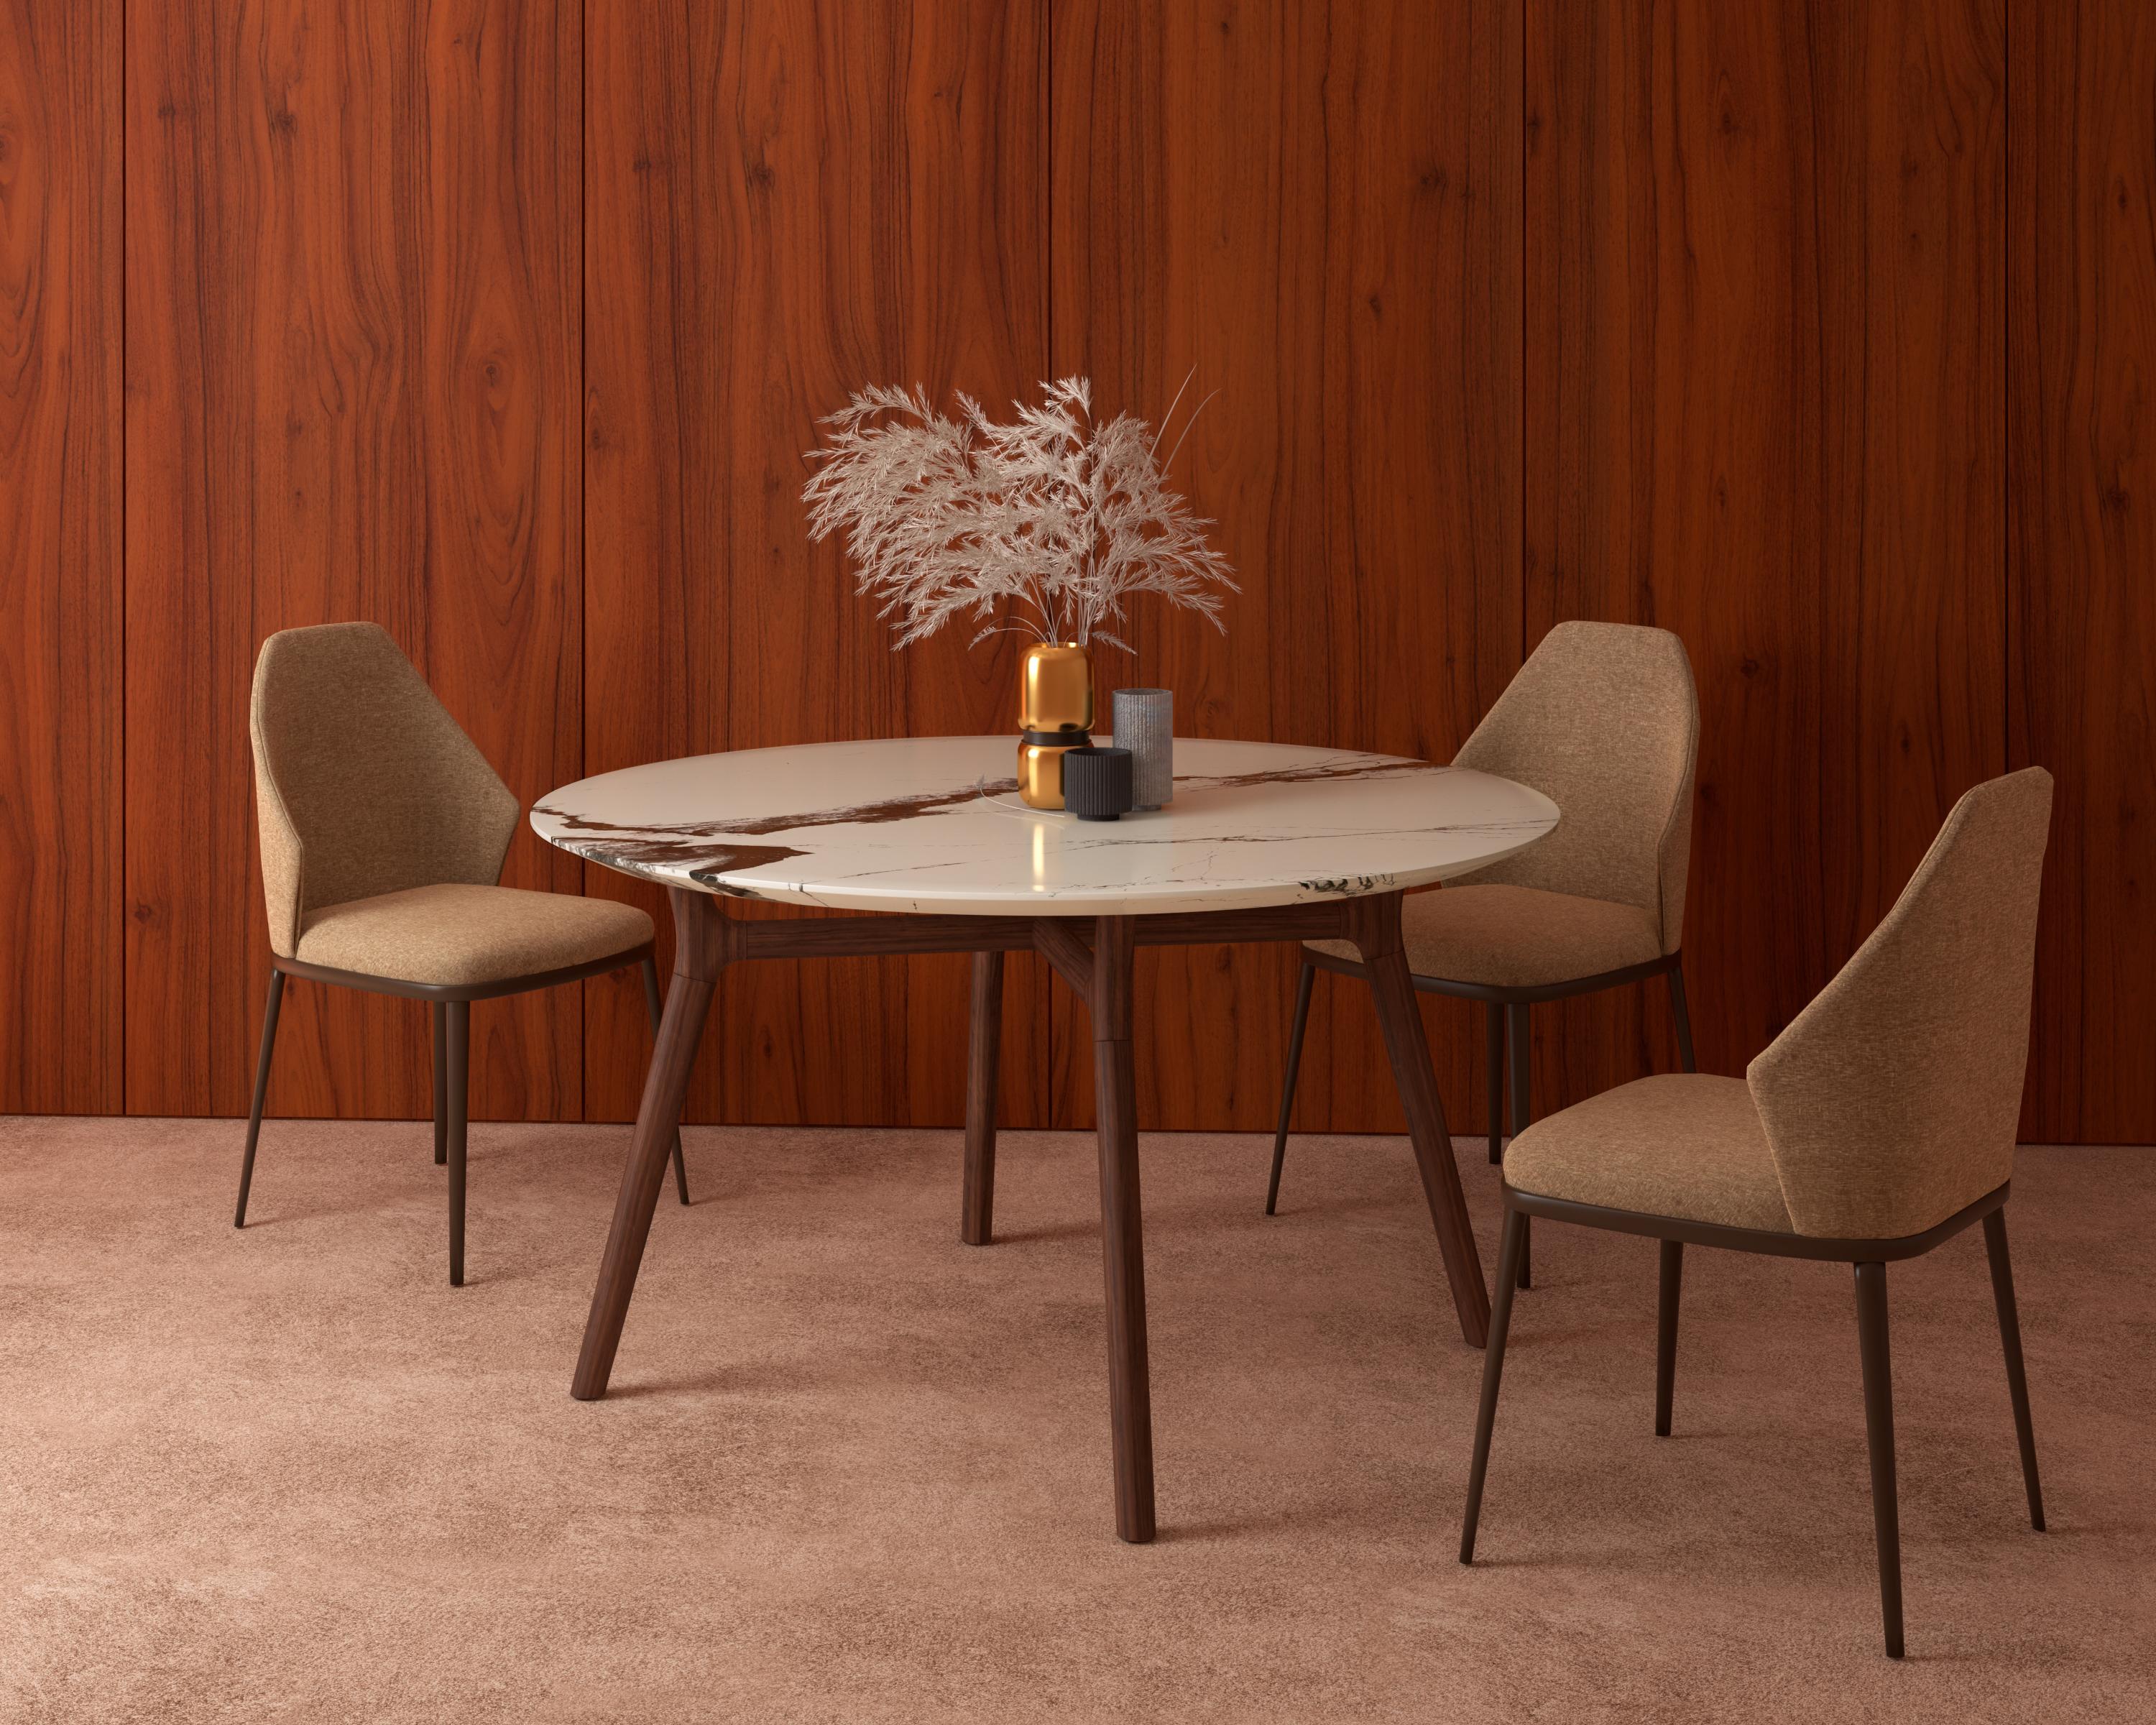 𝗣𝗿𝗼𝗱𝘂𝗰𝘁 𝗗𝗲𝘁𝗮𝗶𝗹𝘀:
The first collection made with wooden frame, integrating more natural and noble materials to our range of products. The finely worked walnut wood of this table supports a cleverly produced marble tabletop, solid in the